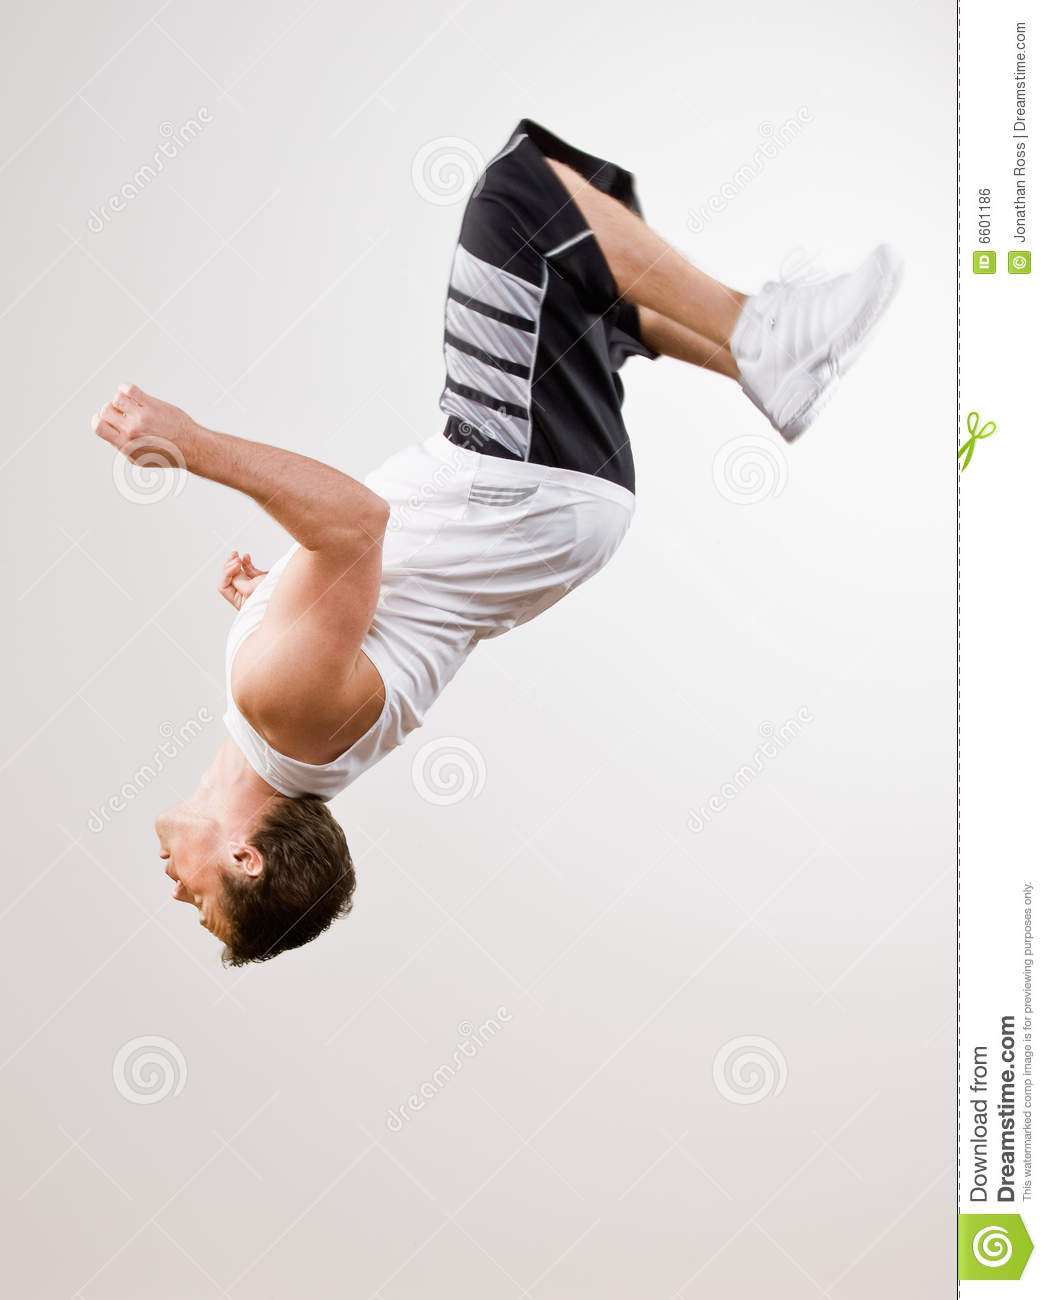 Skilled Athlete Doing Somersault In Mid Air Royalty Free Stock Image